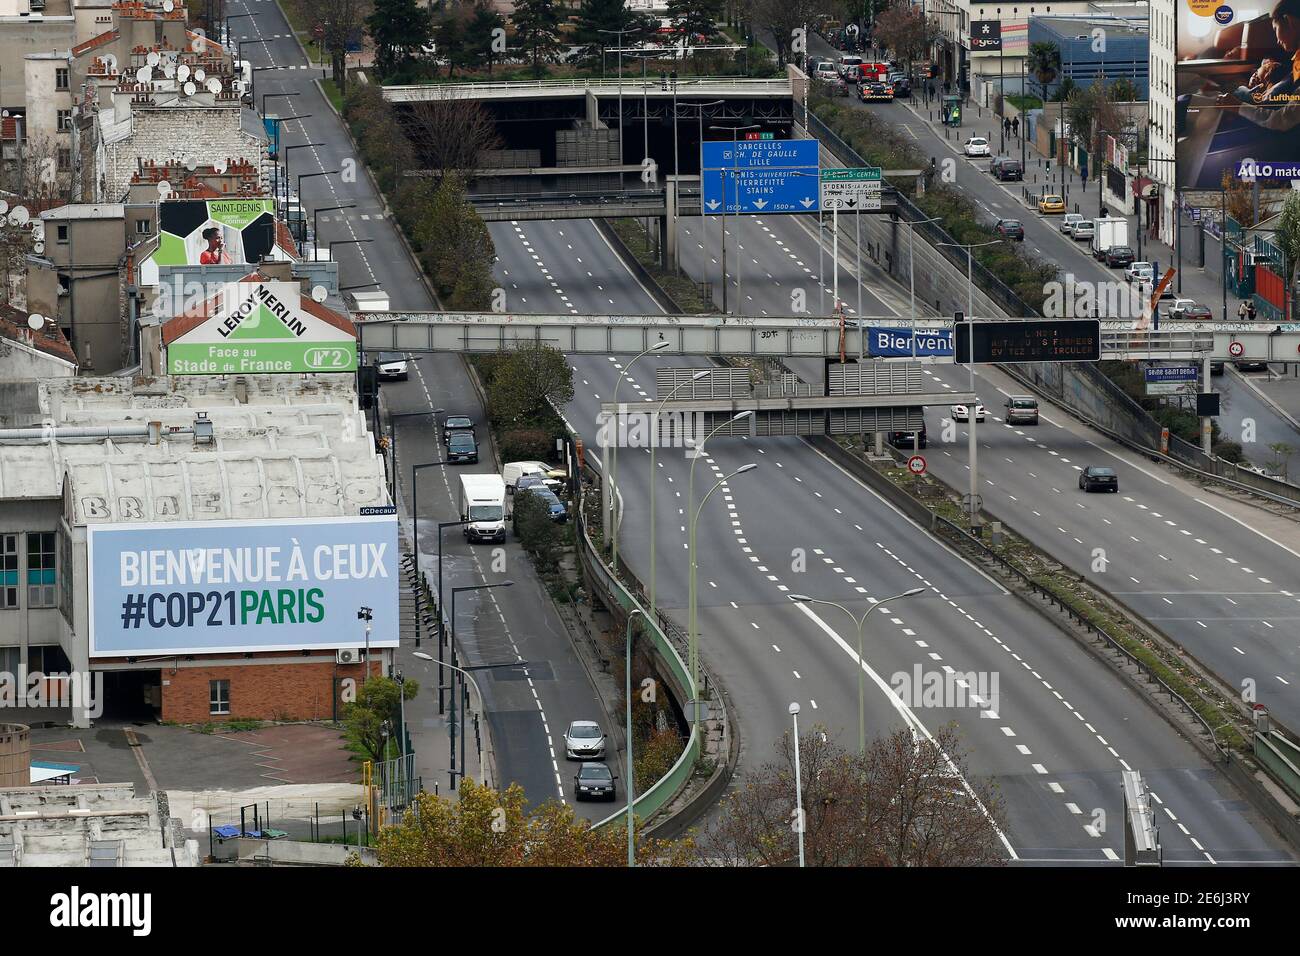 A view shows the A1 motorway without traffic at Porte de la Chapelle in  Paris, France, November 30, 2015 due to the opening day events at the World  Climate Change Conference 2015 (